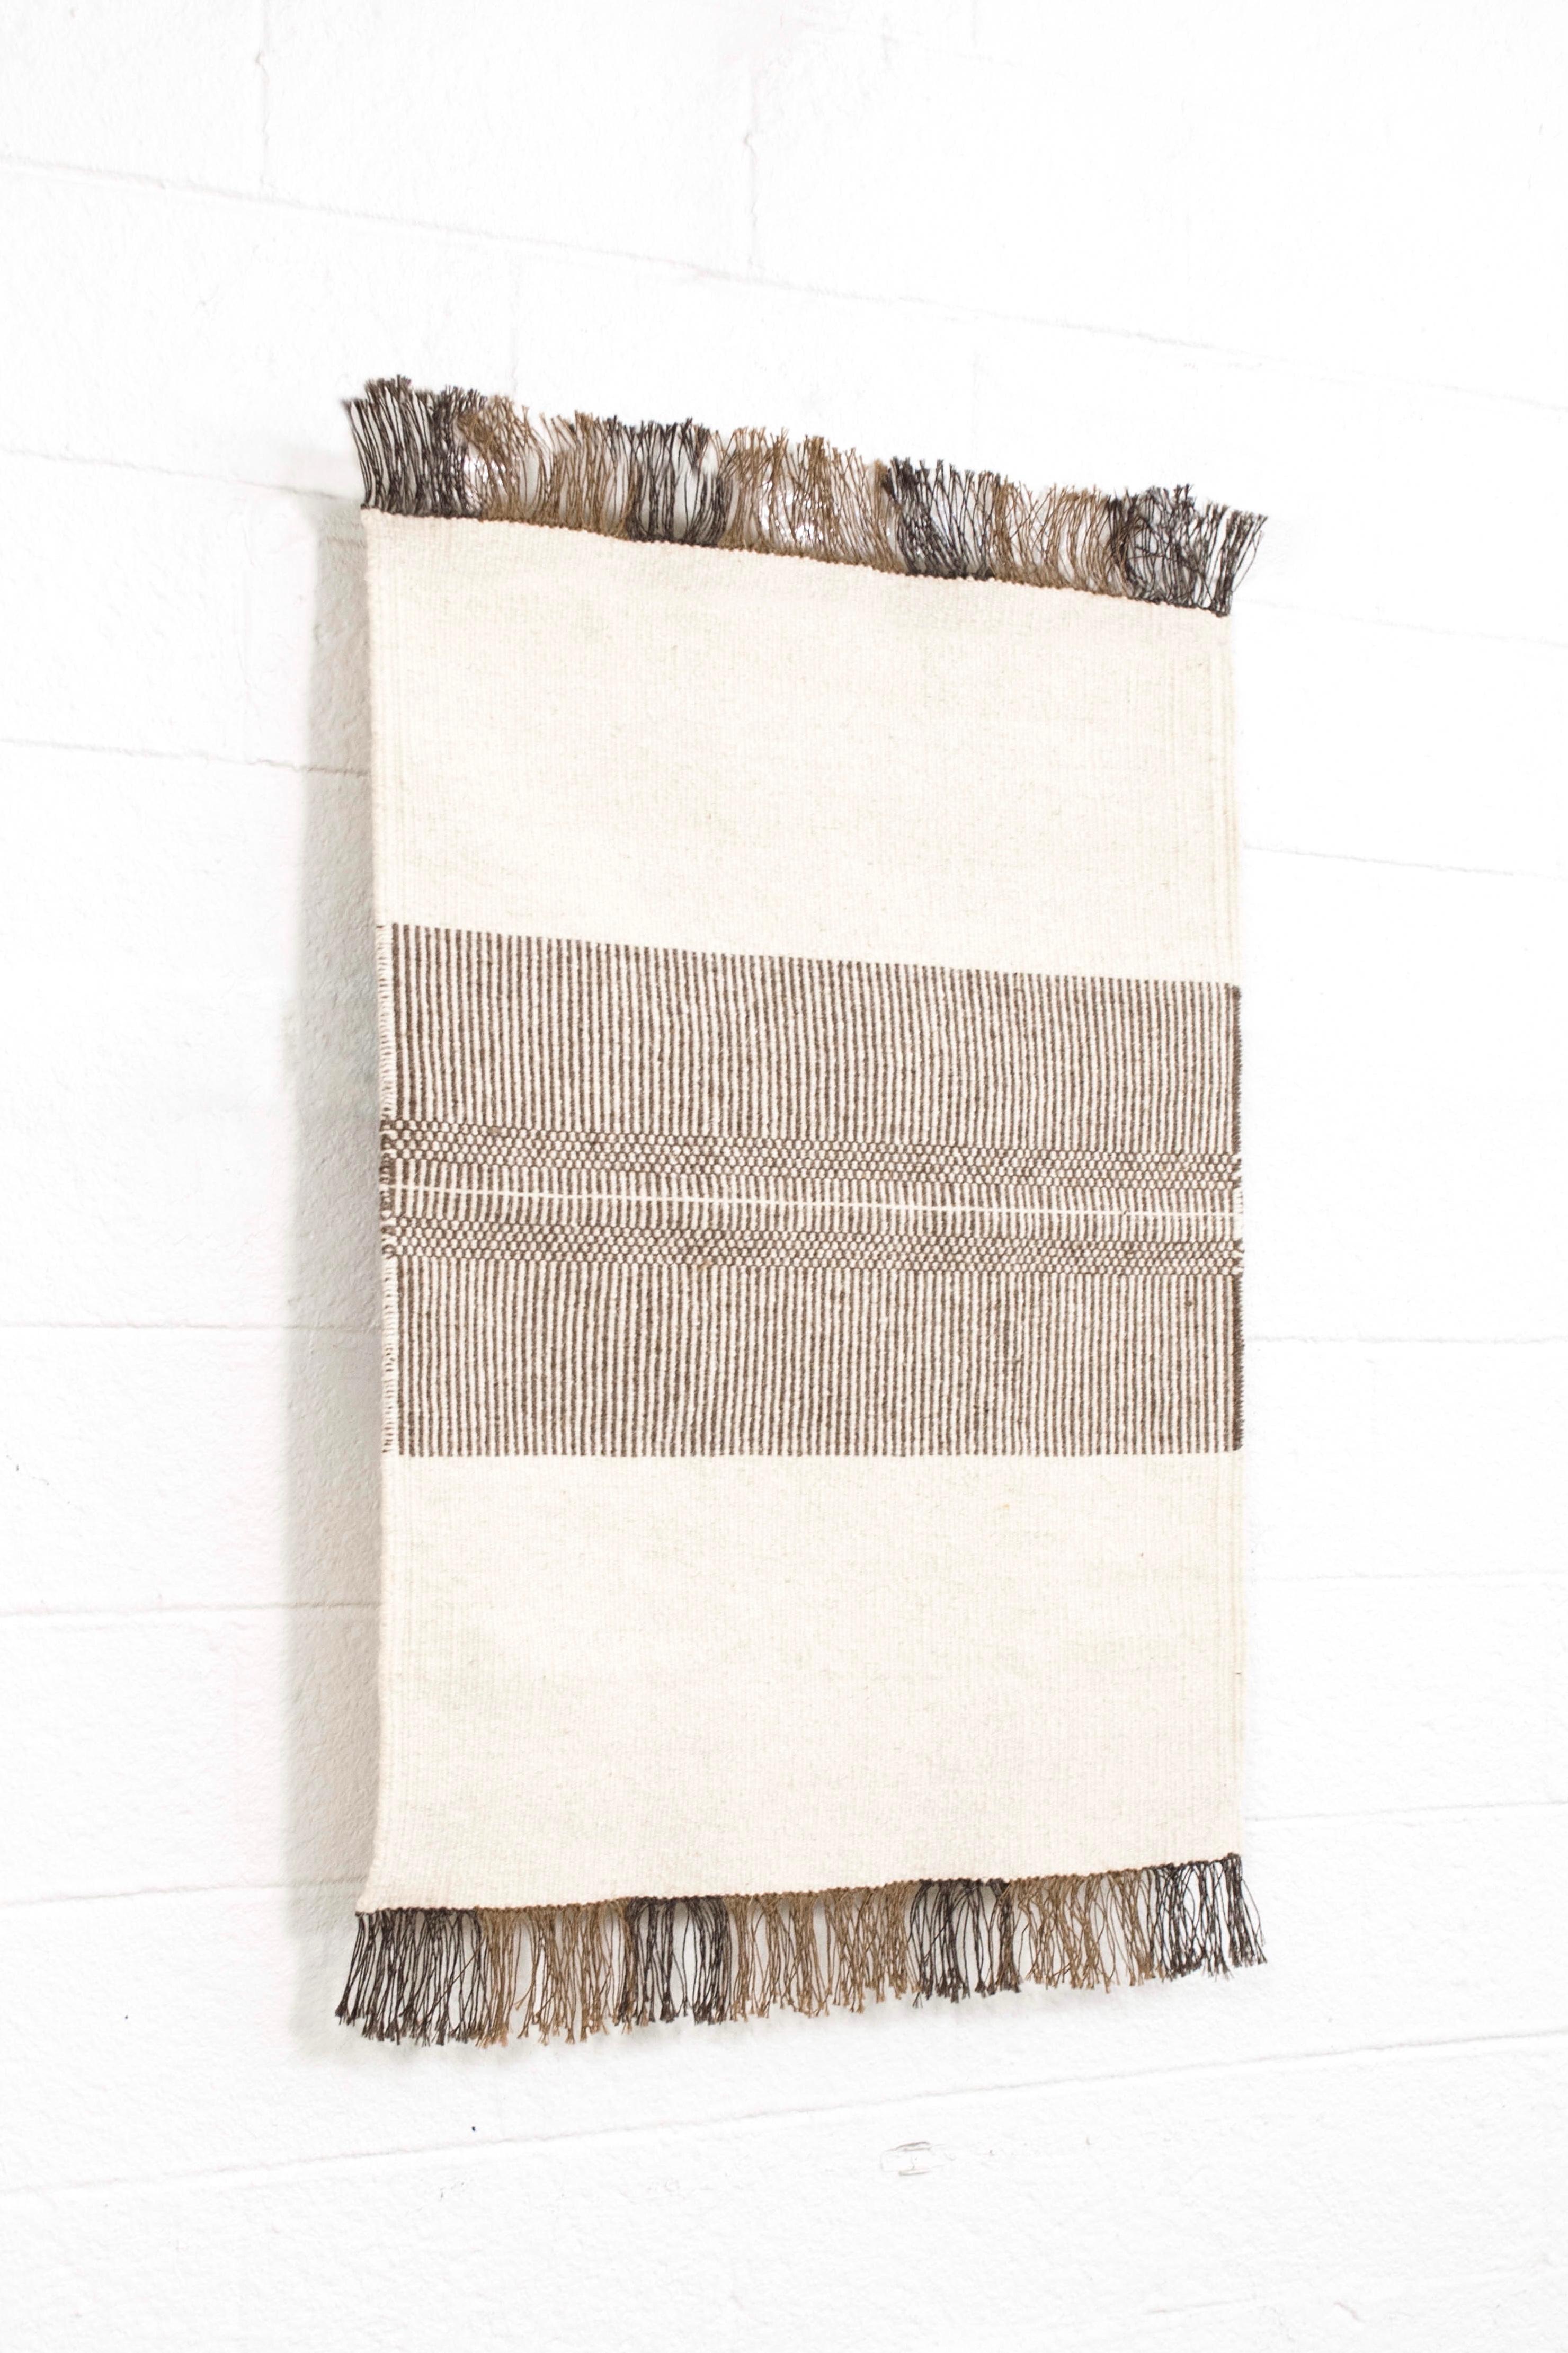 This gorgeous vintage Mid-Century Modern accent rug is exquisitely crafted from hand-loomed 100% wool in varying shades of natural medium brown and features a simple, clean, Minimalist design. Use as an floor accent rug or wall hanging.

Additional